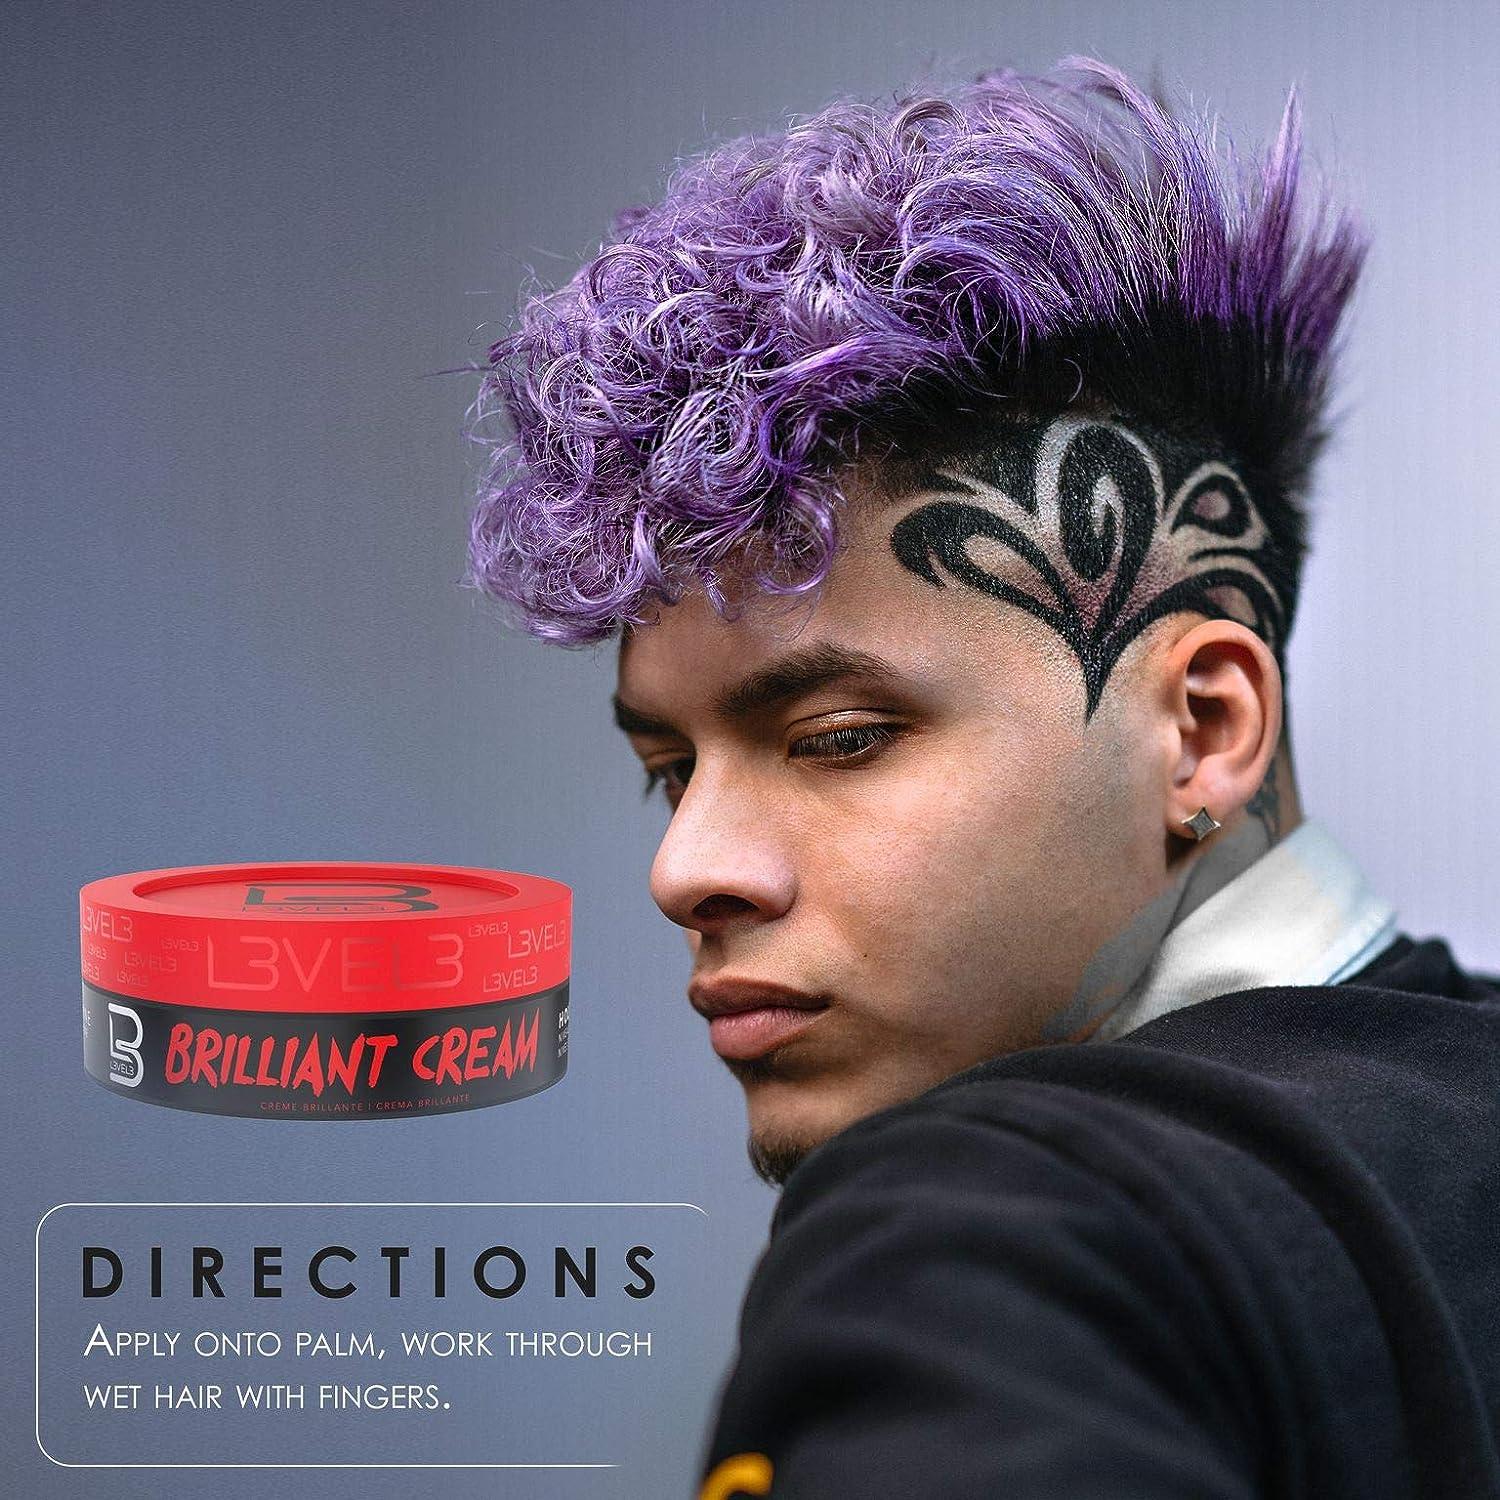 Level 3 Paste - Long-Lasting Hold - Improves Strength and Volume of Hair L3  - Protects Against Hair Damage - Level Three Men Styling Product :  : Beauty & Personal Care